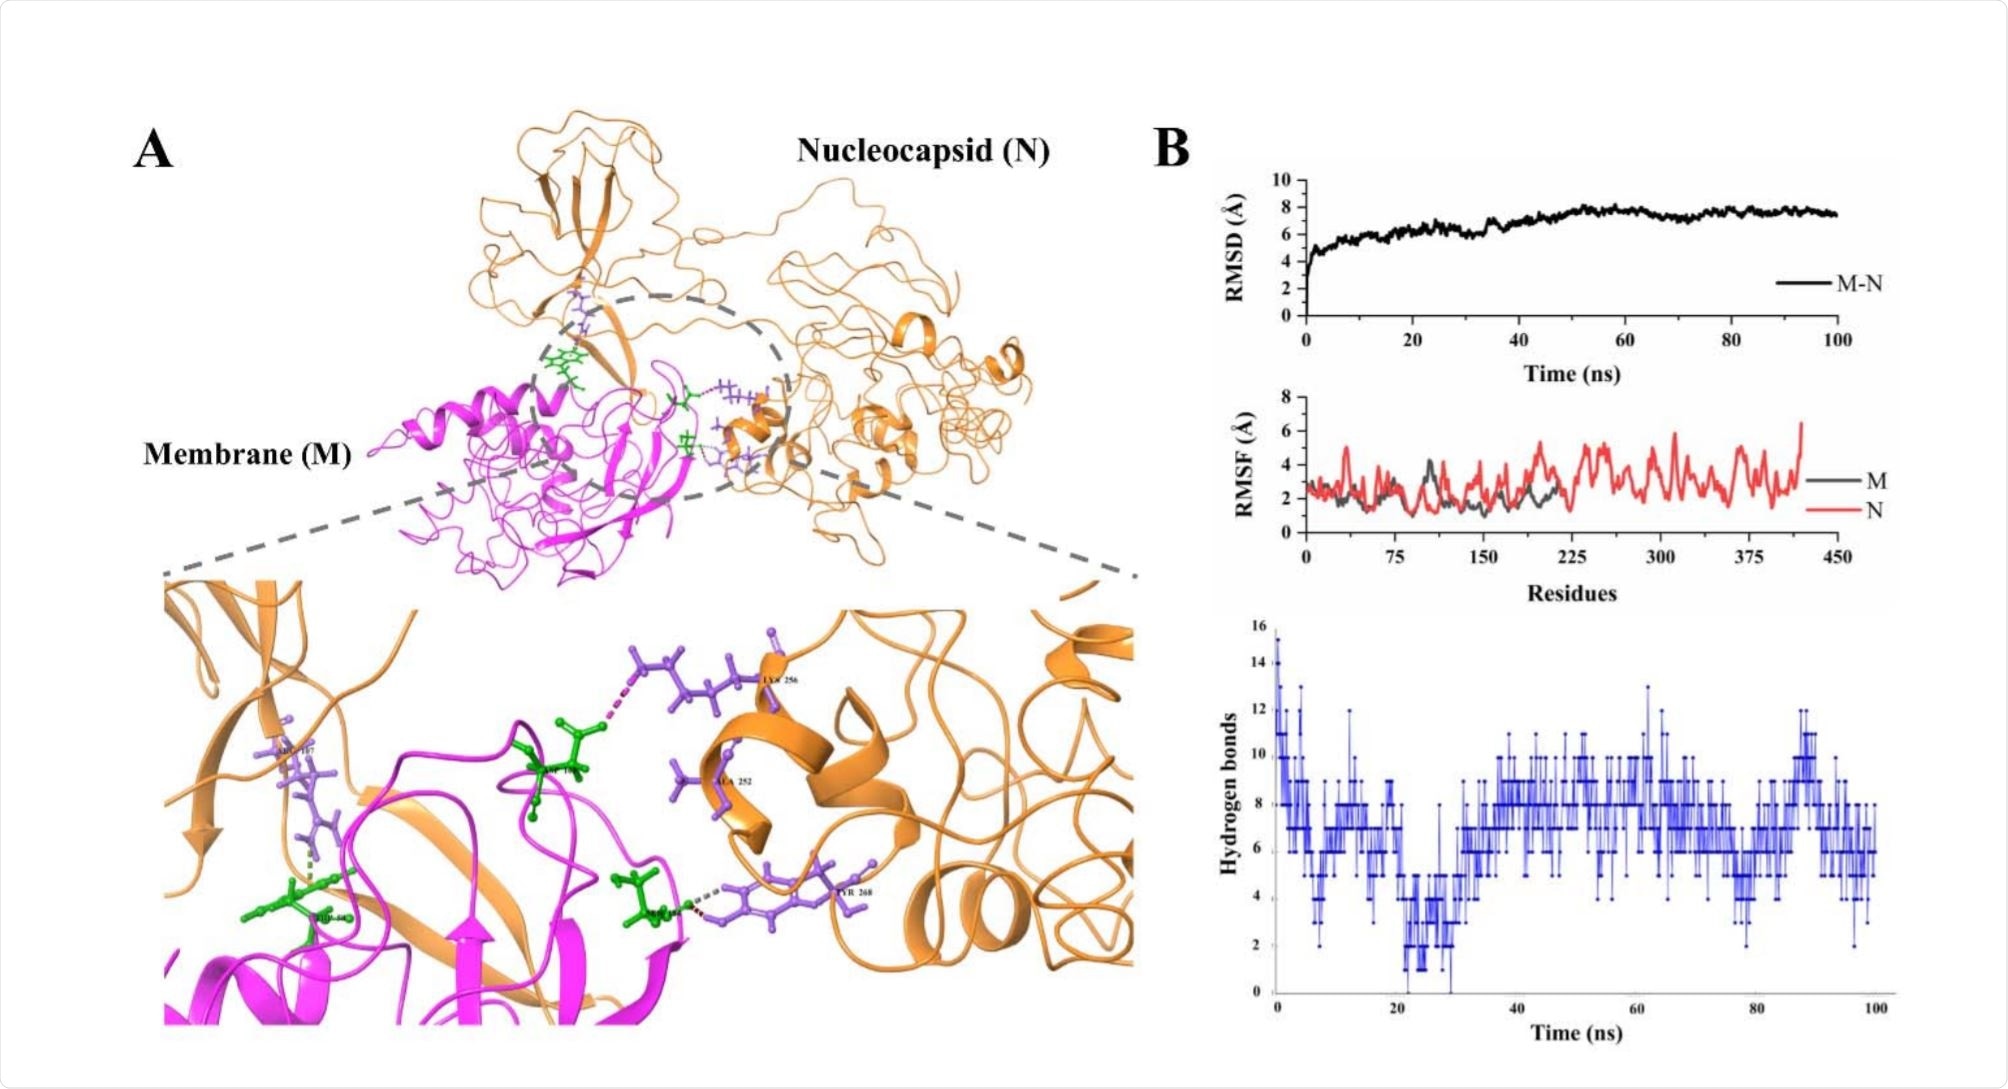 Protein-protein docking of M and N proteins structure models.